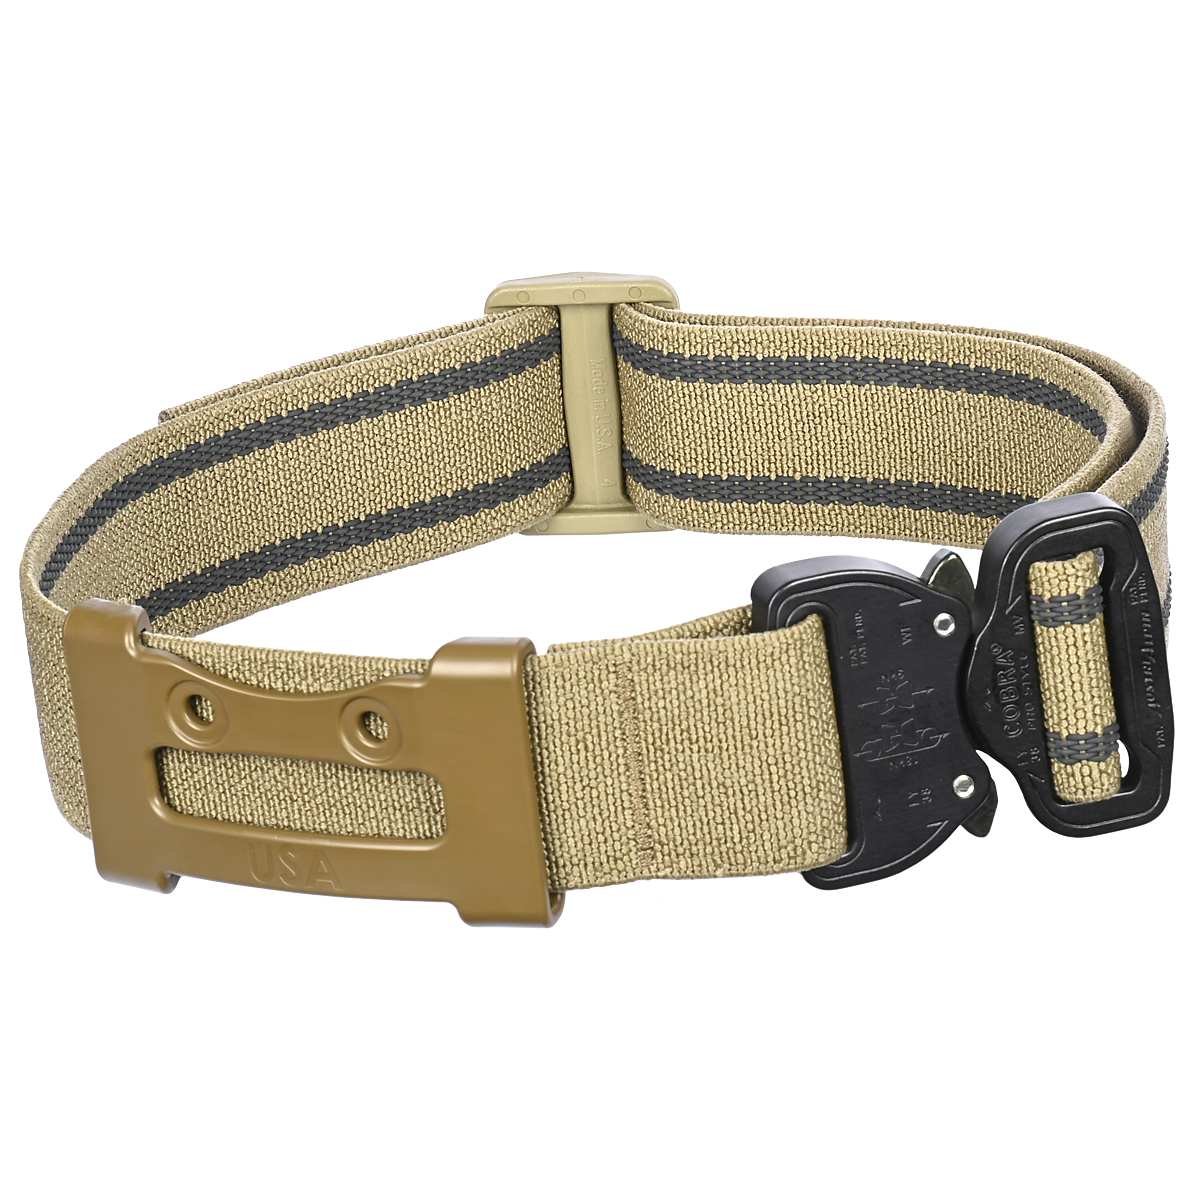 Now Available: Leg Strap Adapter for Duty Holsters & ALQD - DARA